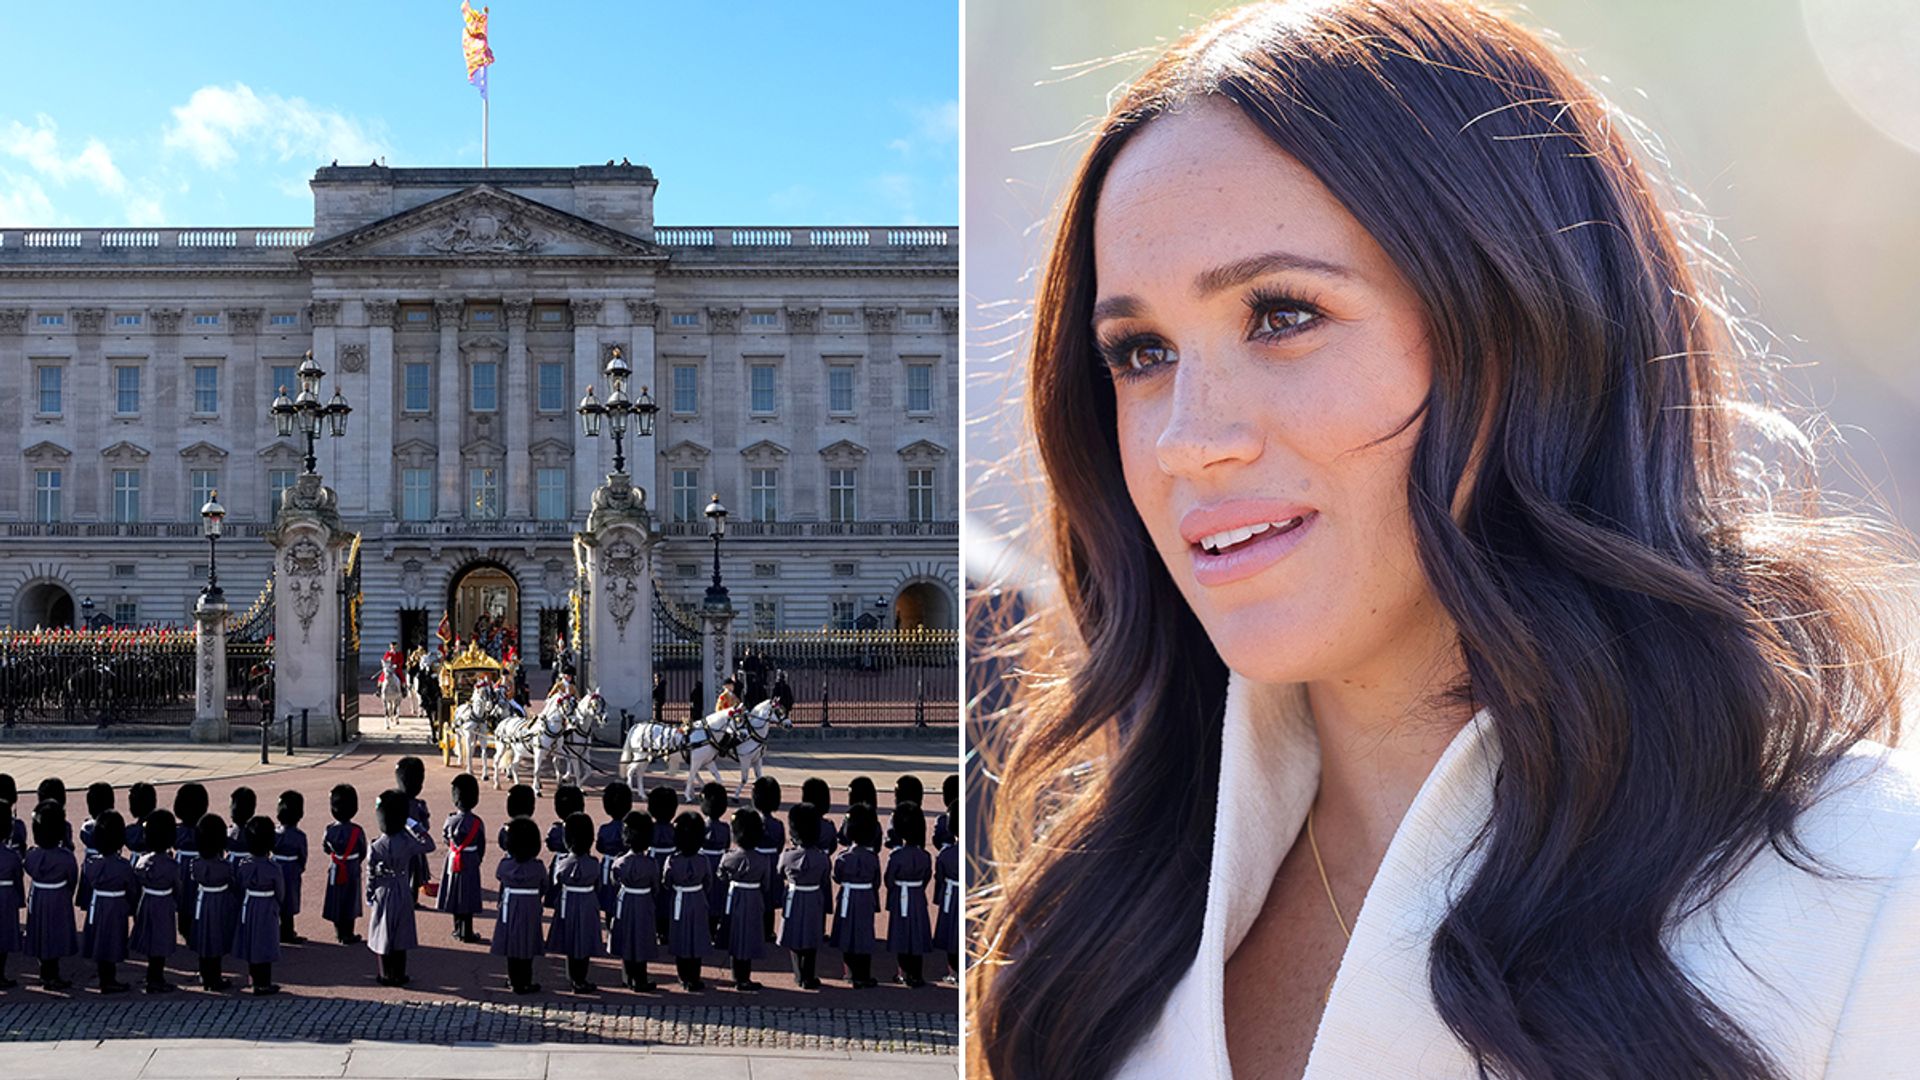 Buckingham Palace shares cheeky jam video following release of Meghan Markle's